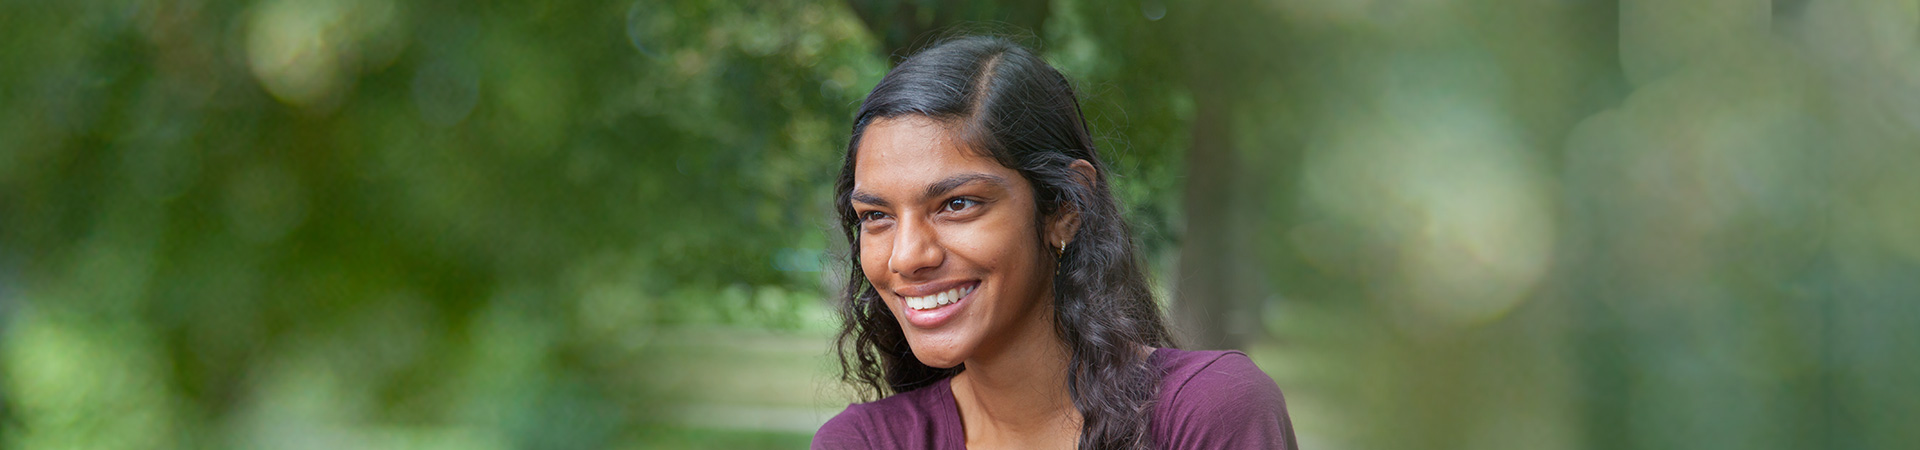  A outdoor headshot of an older Girl Scout  